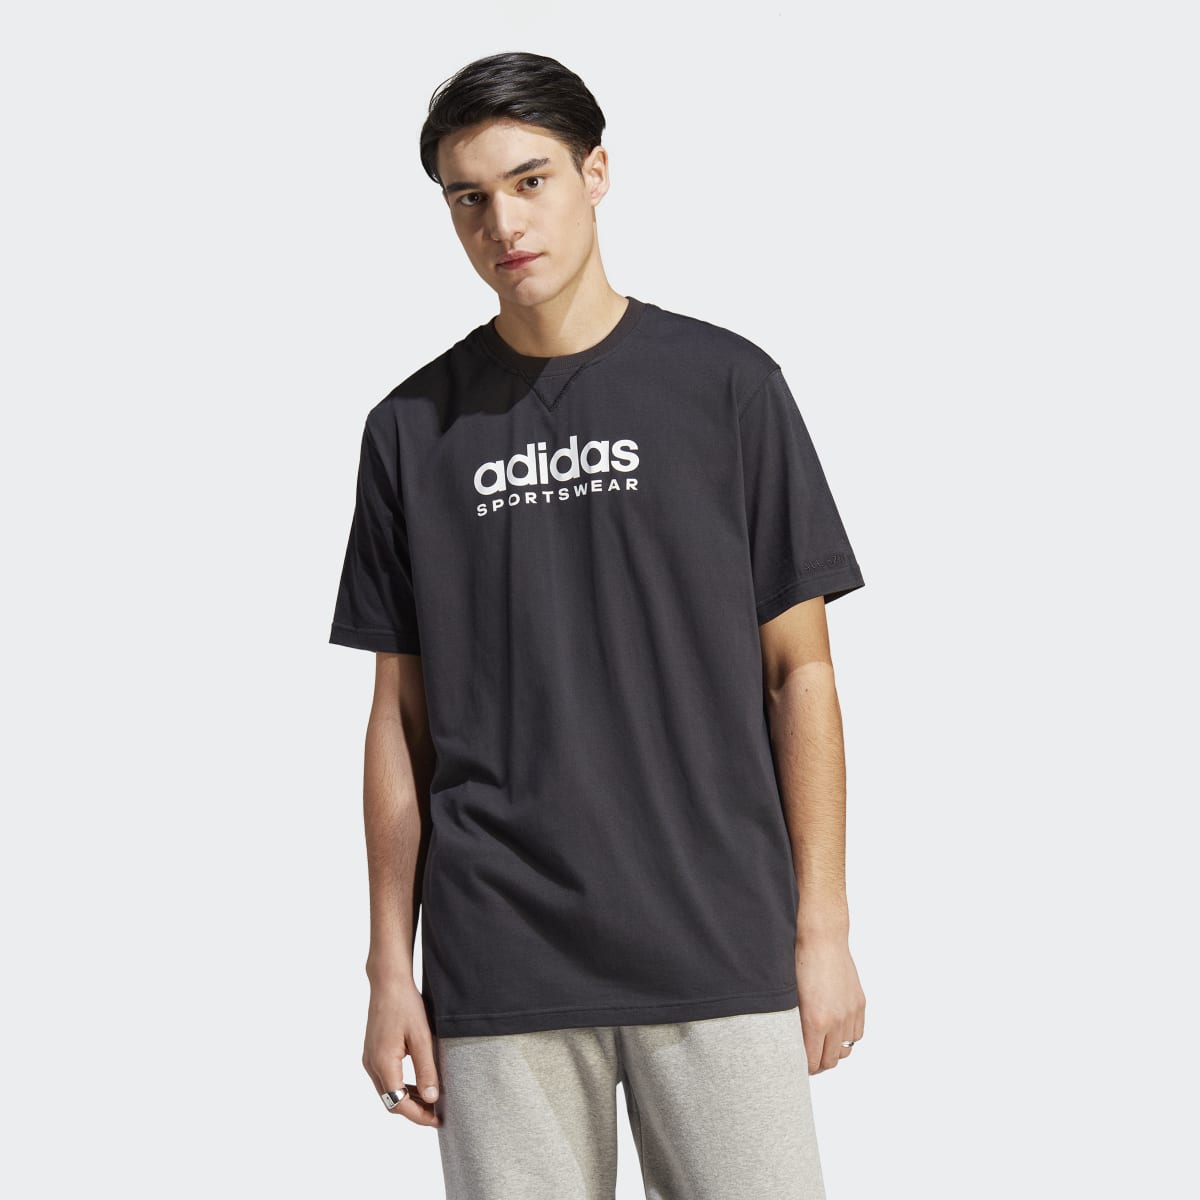 Tee SZN Adidas $55 PriceGrabber | Graphic | - All